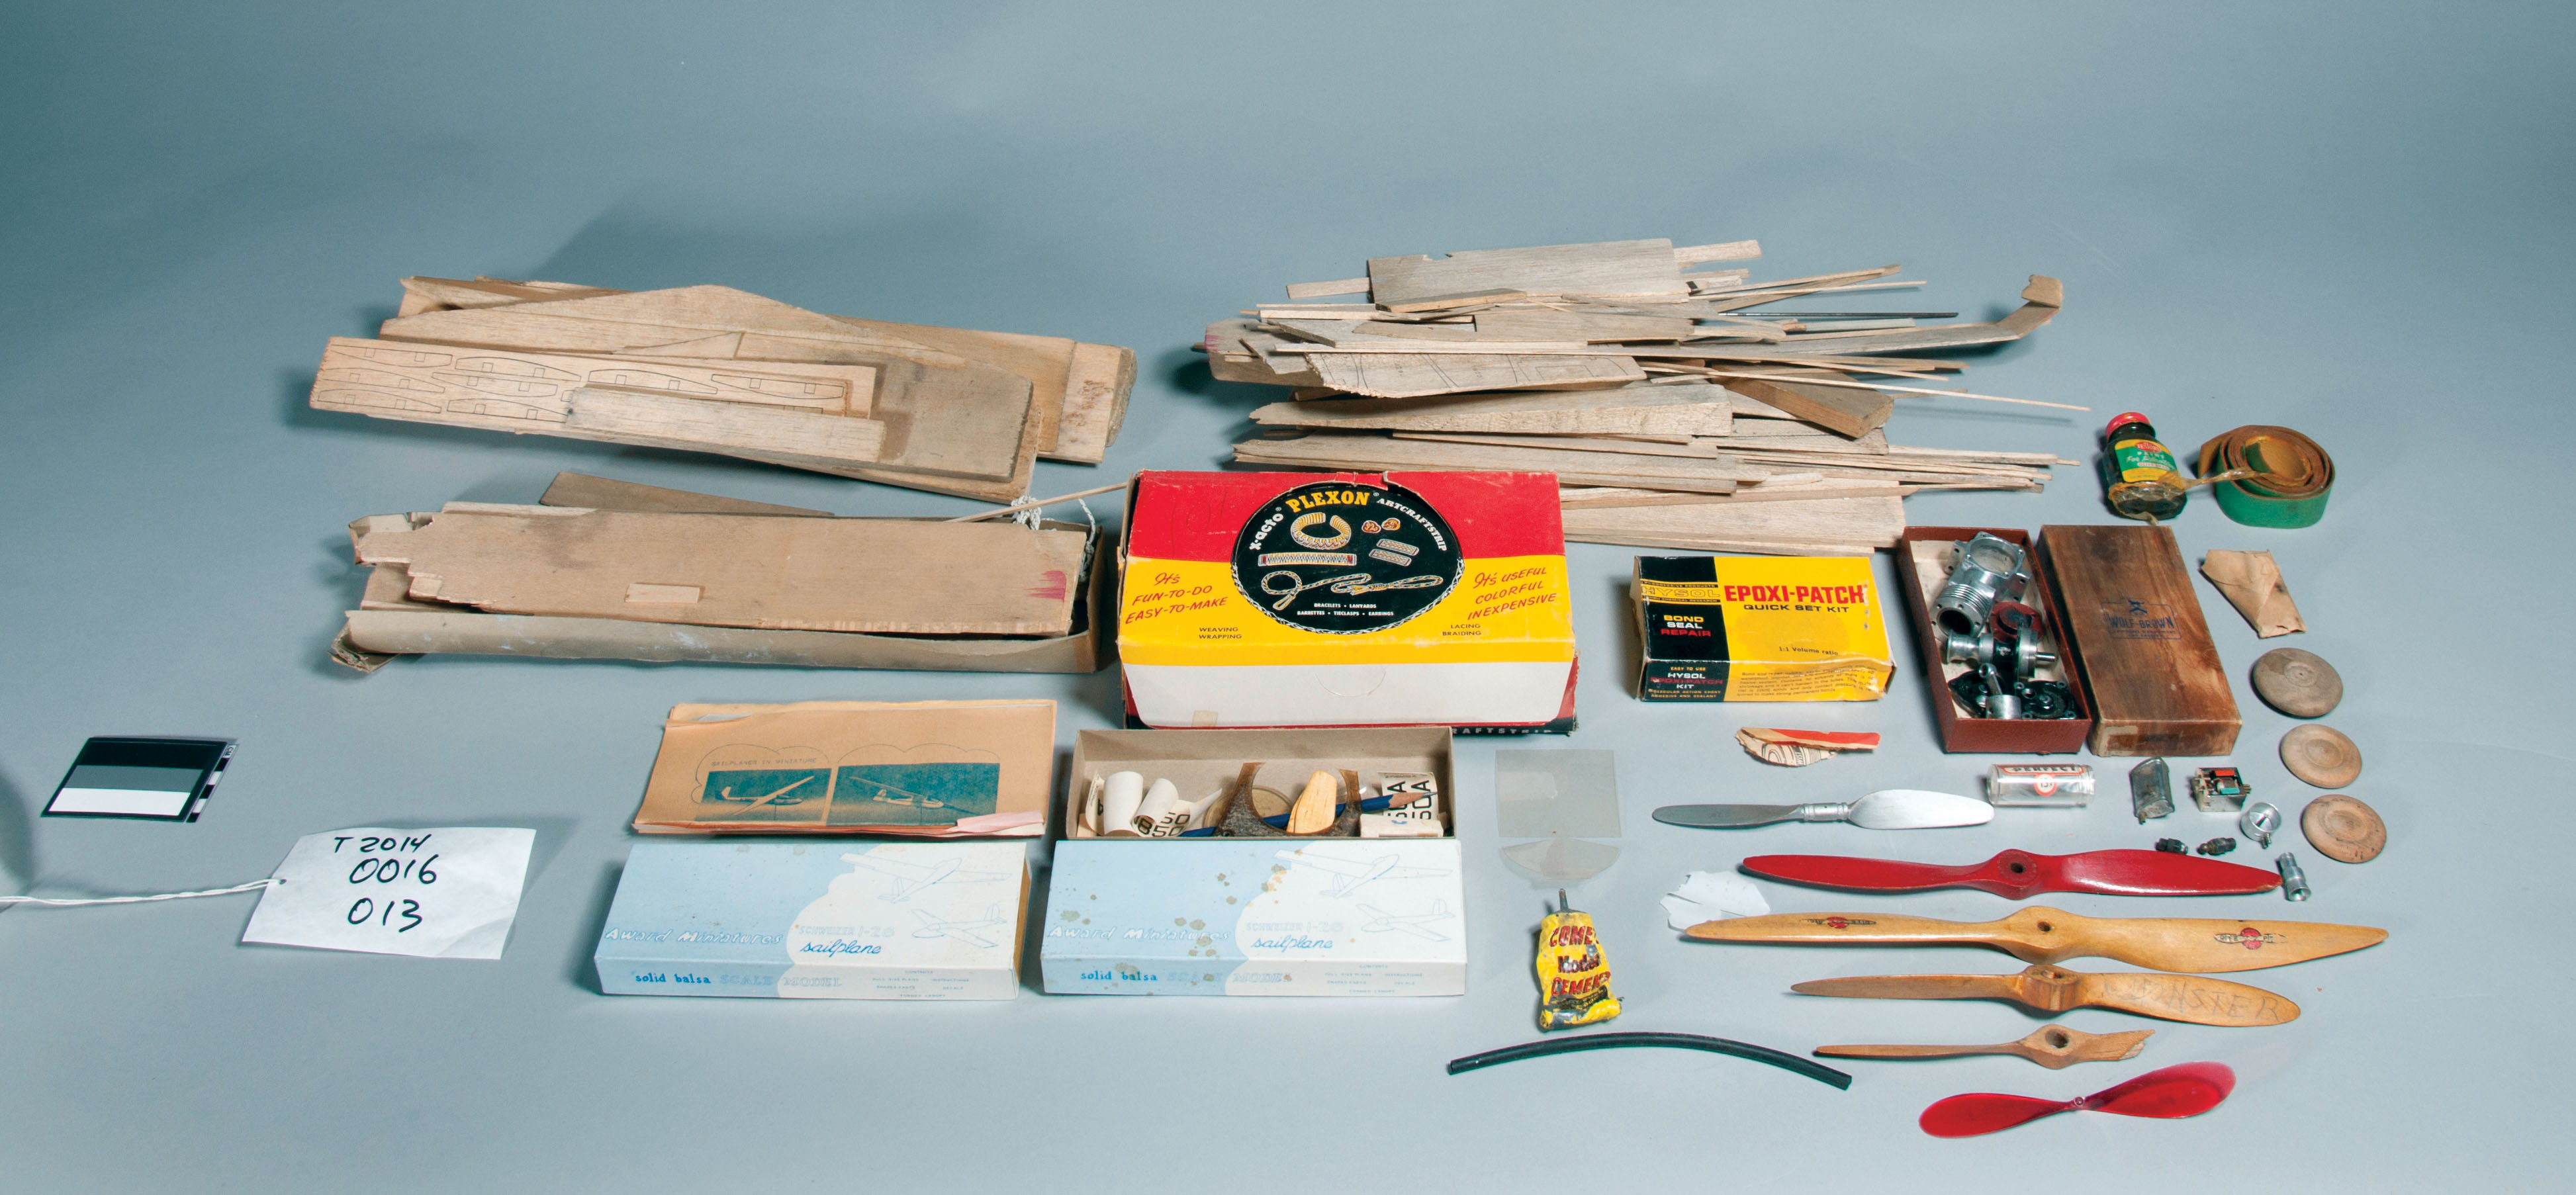 this is a collection of neils model aircraft building tools and parts